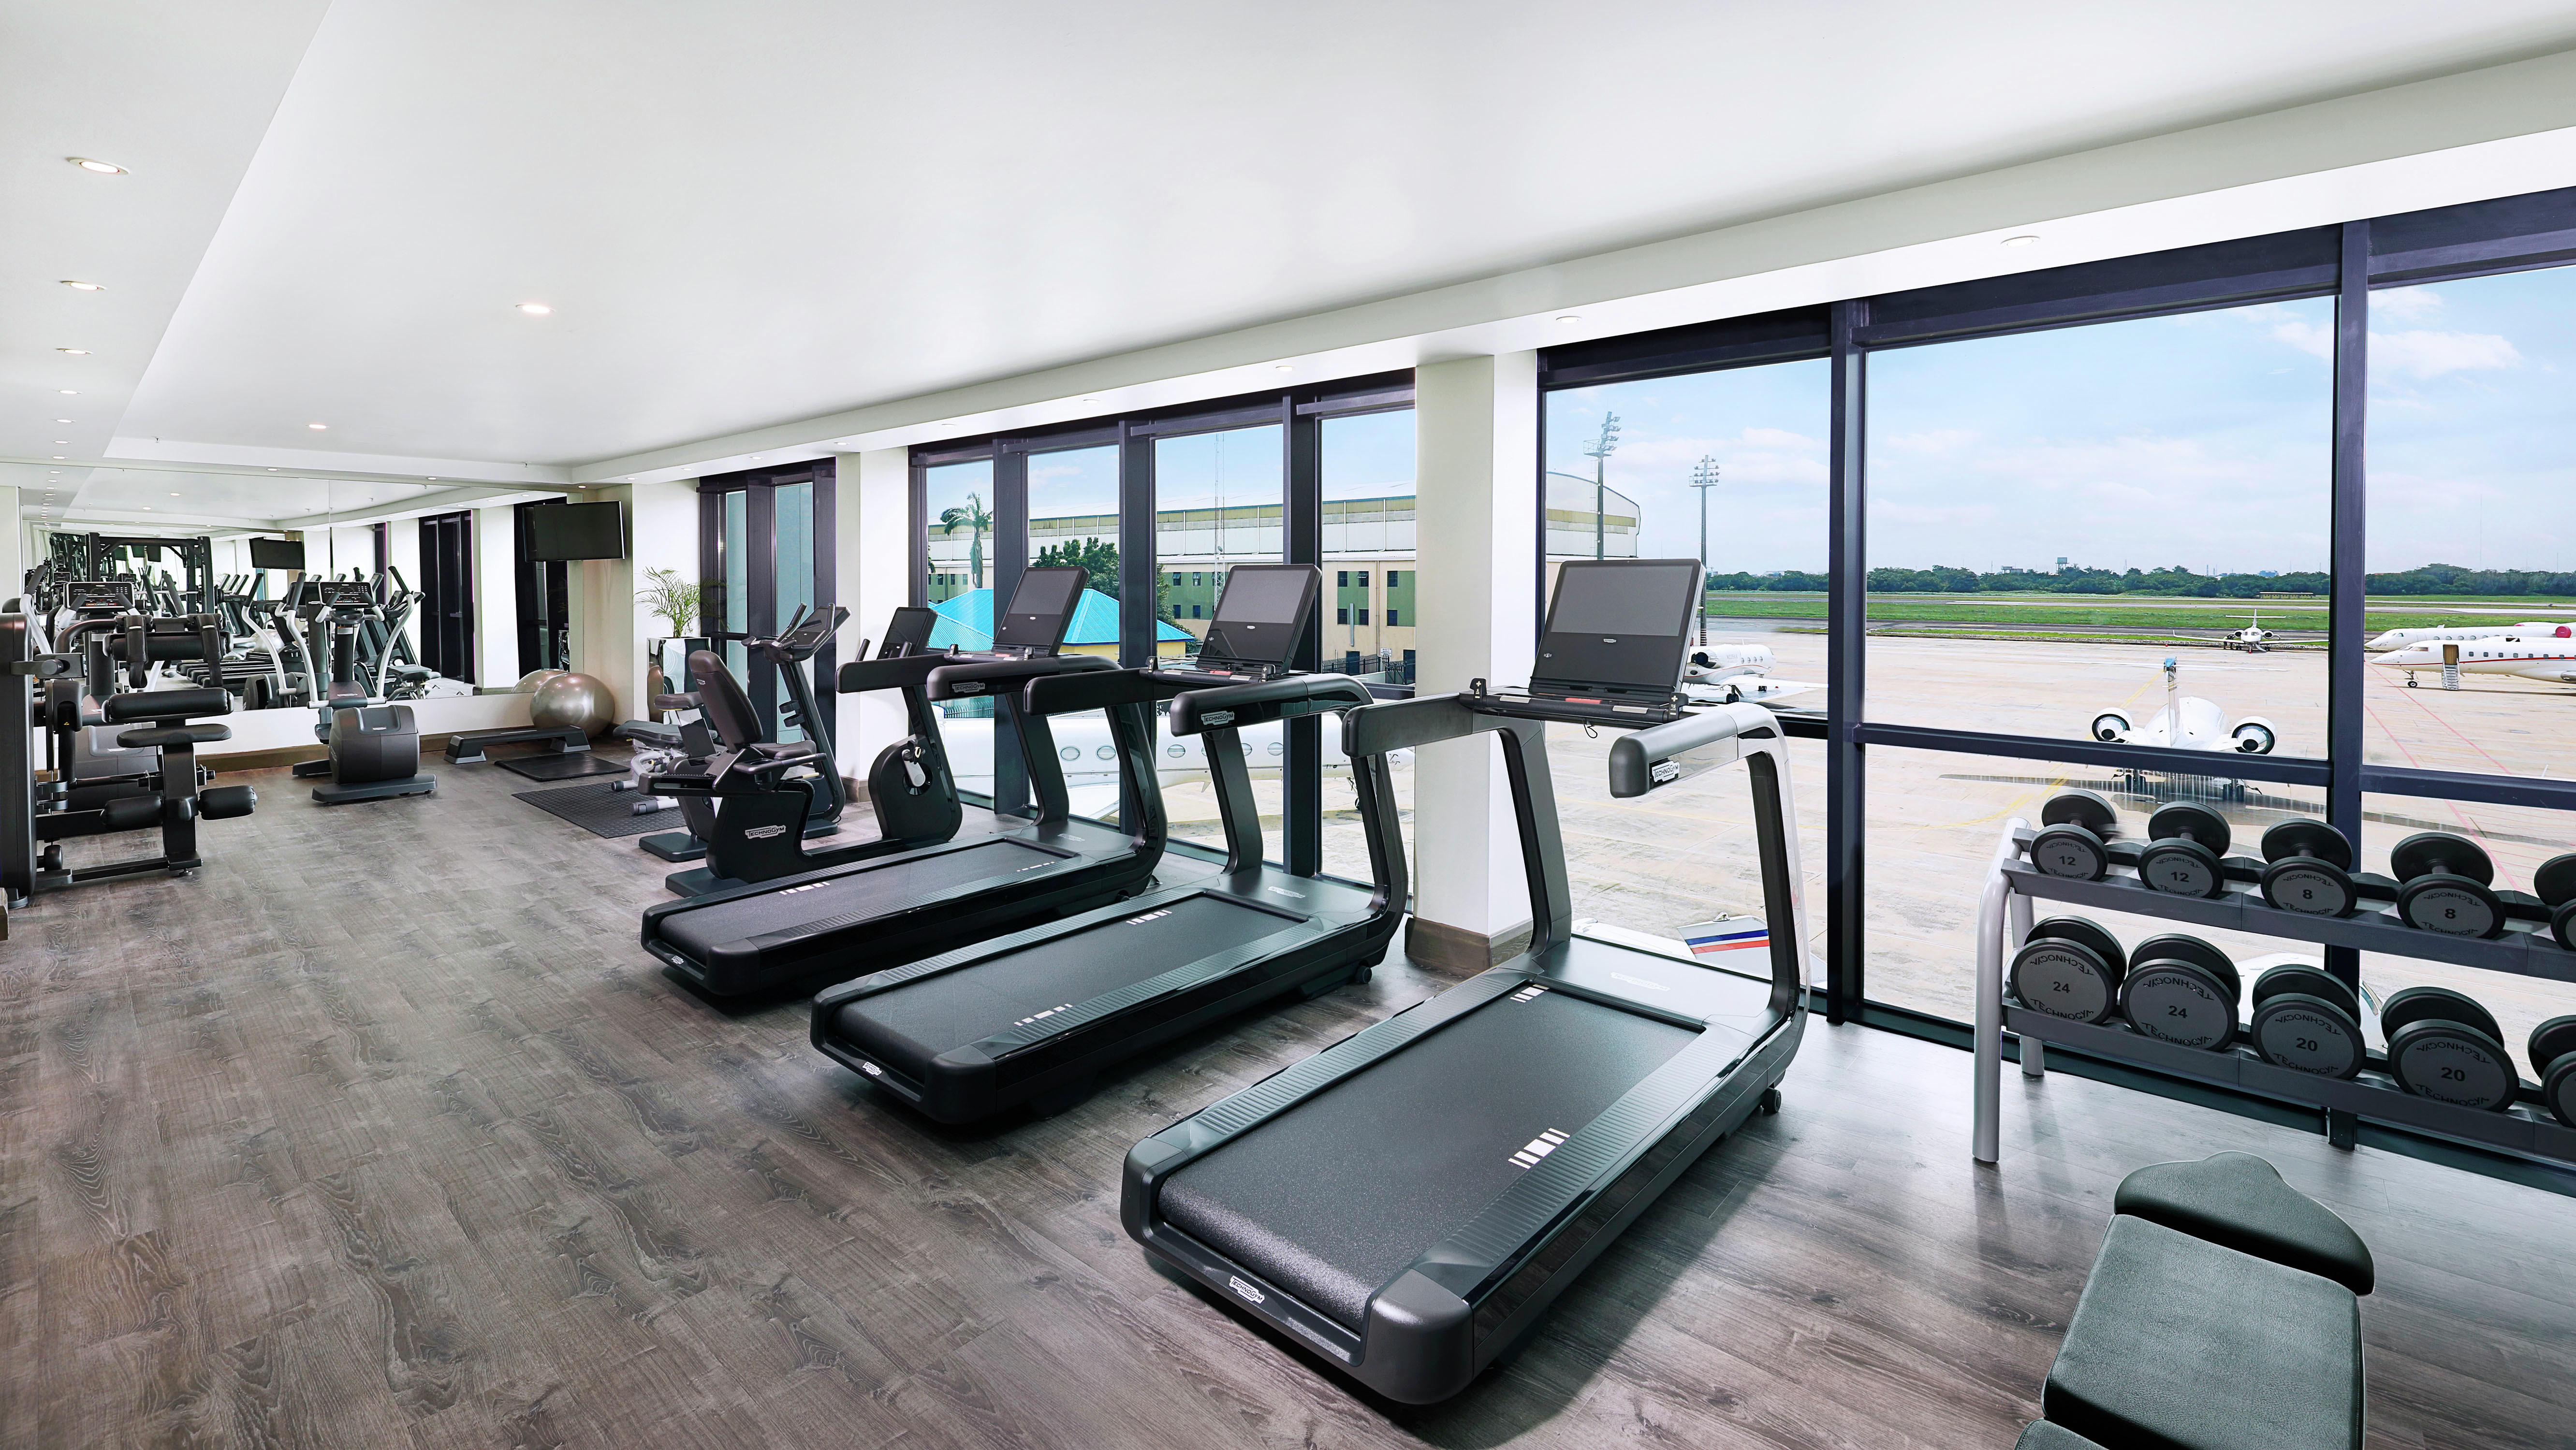 Gym With Treadmills and Weights